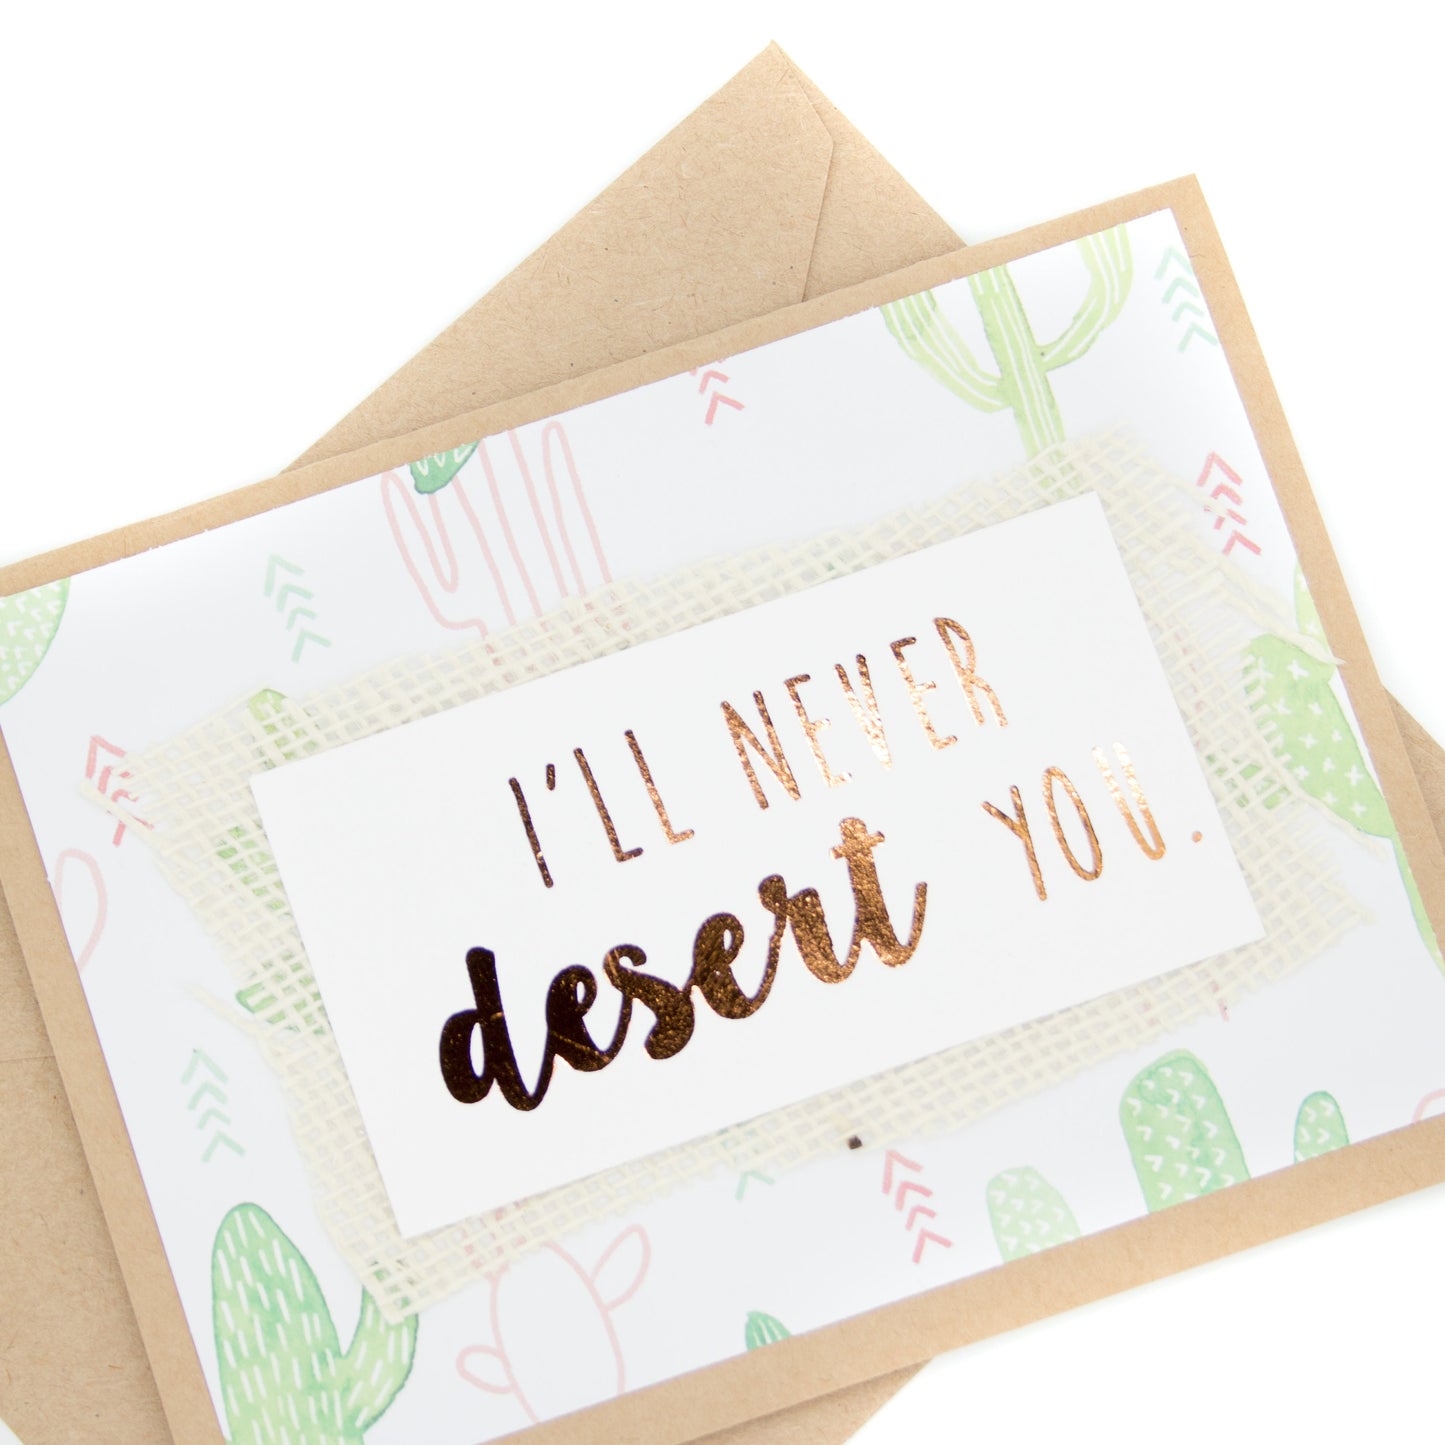 Handmade "I'll Never Desert You." Copper Foil Embossed Card on Cactus Print - Greeting Card made from Card stock